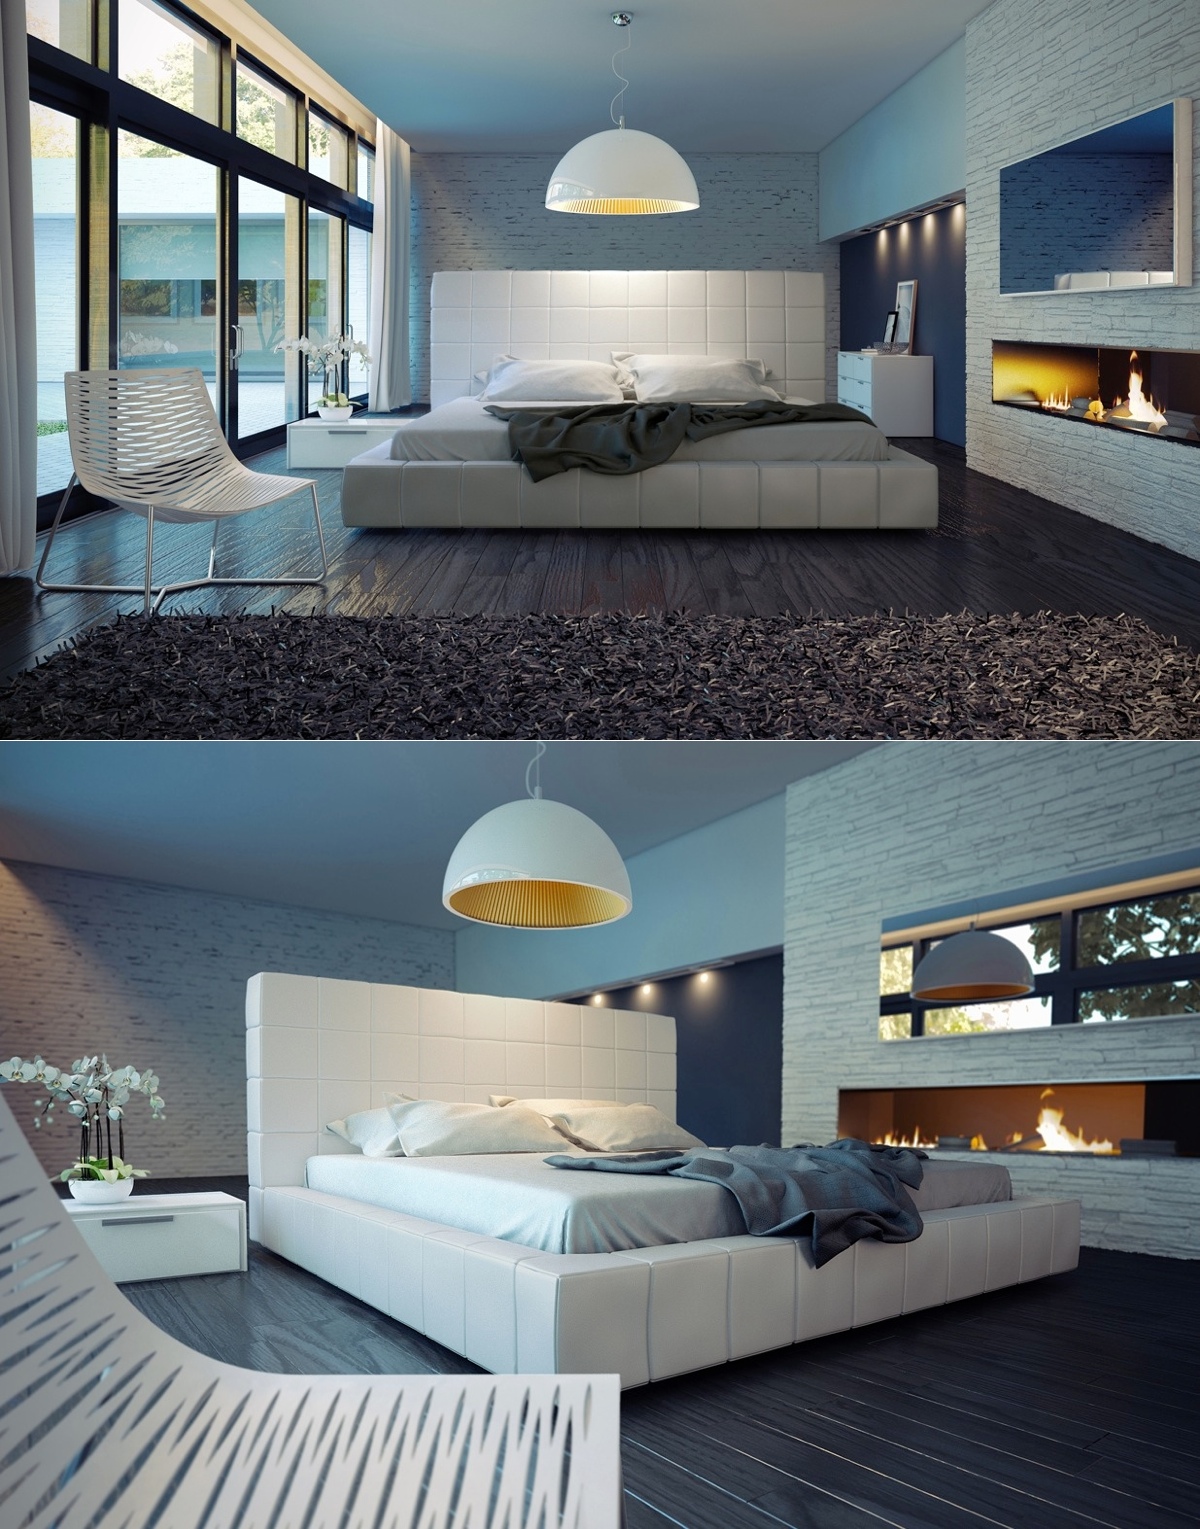 Design ideas for luxury bedrooms "width =" 1200 "height =" 1529 "srcset =" https://mileray.com/wp-content/uploads/2020/05/1588508524_540_Luxury-Bedroom-Designs-Which-Arrange-With-Contemporary-Style-Decor-Ideas.jpeg 1200w, https://mileray.com / wp-content / uploads / 2016/10 / Albert-Mizuno5-235x300.jpeg 235w, https://mileray.com/wp-content/uploads/2016/10/Albert-Mizuno5-768x979.jpeg 768w, https: / / mileray.com/wp-content/uploads/2016/10/Albert-Mizuno5-804x1024.jpeg 804w, https://mileray.com/wp-content/uploads/2016/10/Albert-Mizuno5-696x887.jpeg 696w, https://mileray.com/wp-content/uploads/2016/10/Albert-Mizuno5-1068x1361.jpeg 1068w, https://mileray.com/wp-content/uploads/2016/10/Albert-Mizuno5- 330x420 .jpeg 330w "sizes =" (maximum width: 1200px) 100vw, 1200px